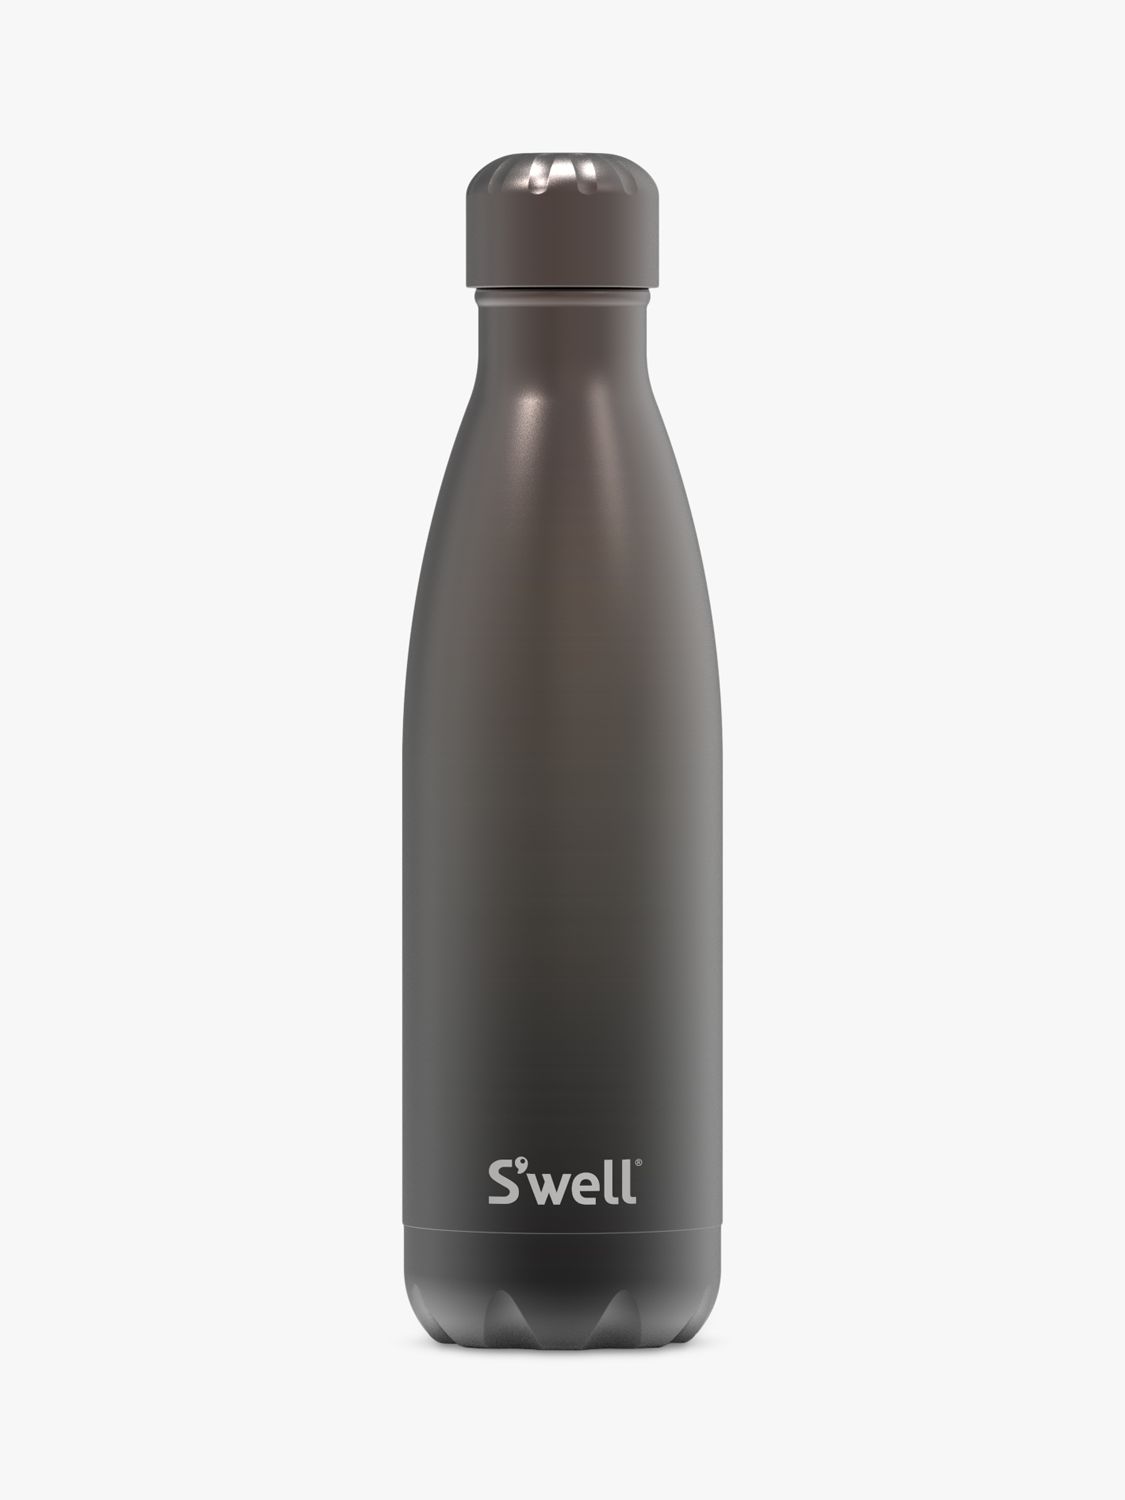 S'well Borealis Vacuum Insulated Stainless Steel Drinks Bottle, 500ml